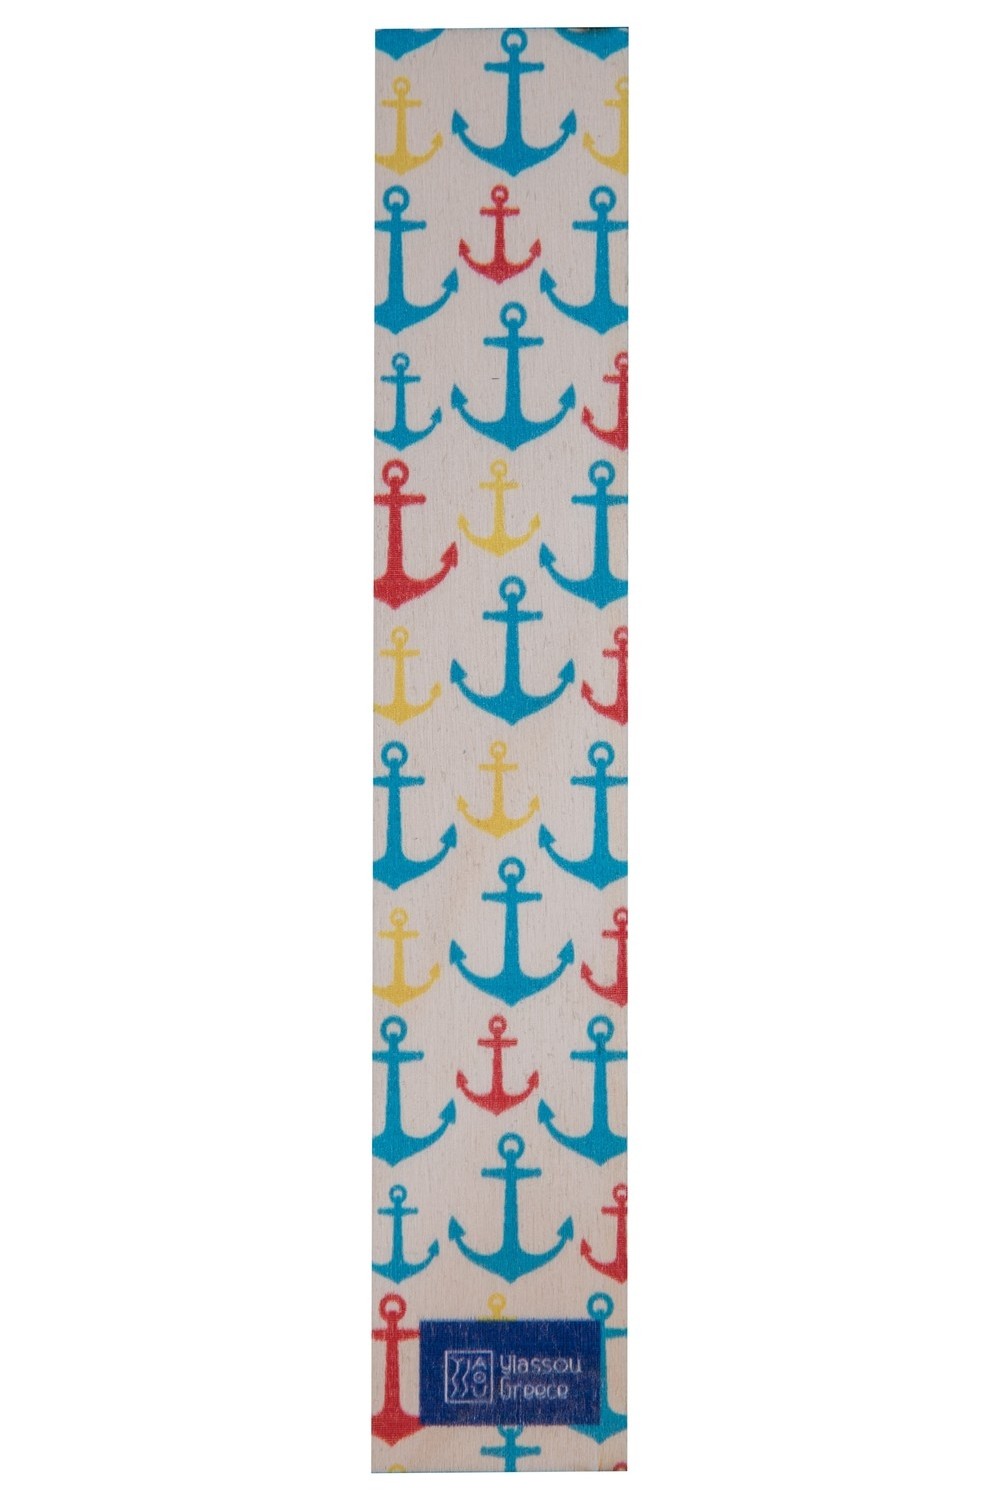 THE "ANCHOR" WOODEN BOOKMARK PATTERN